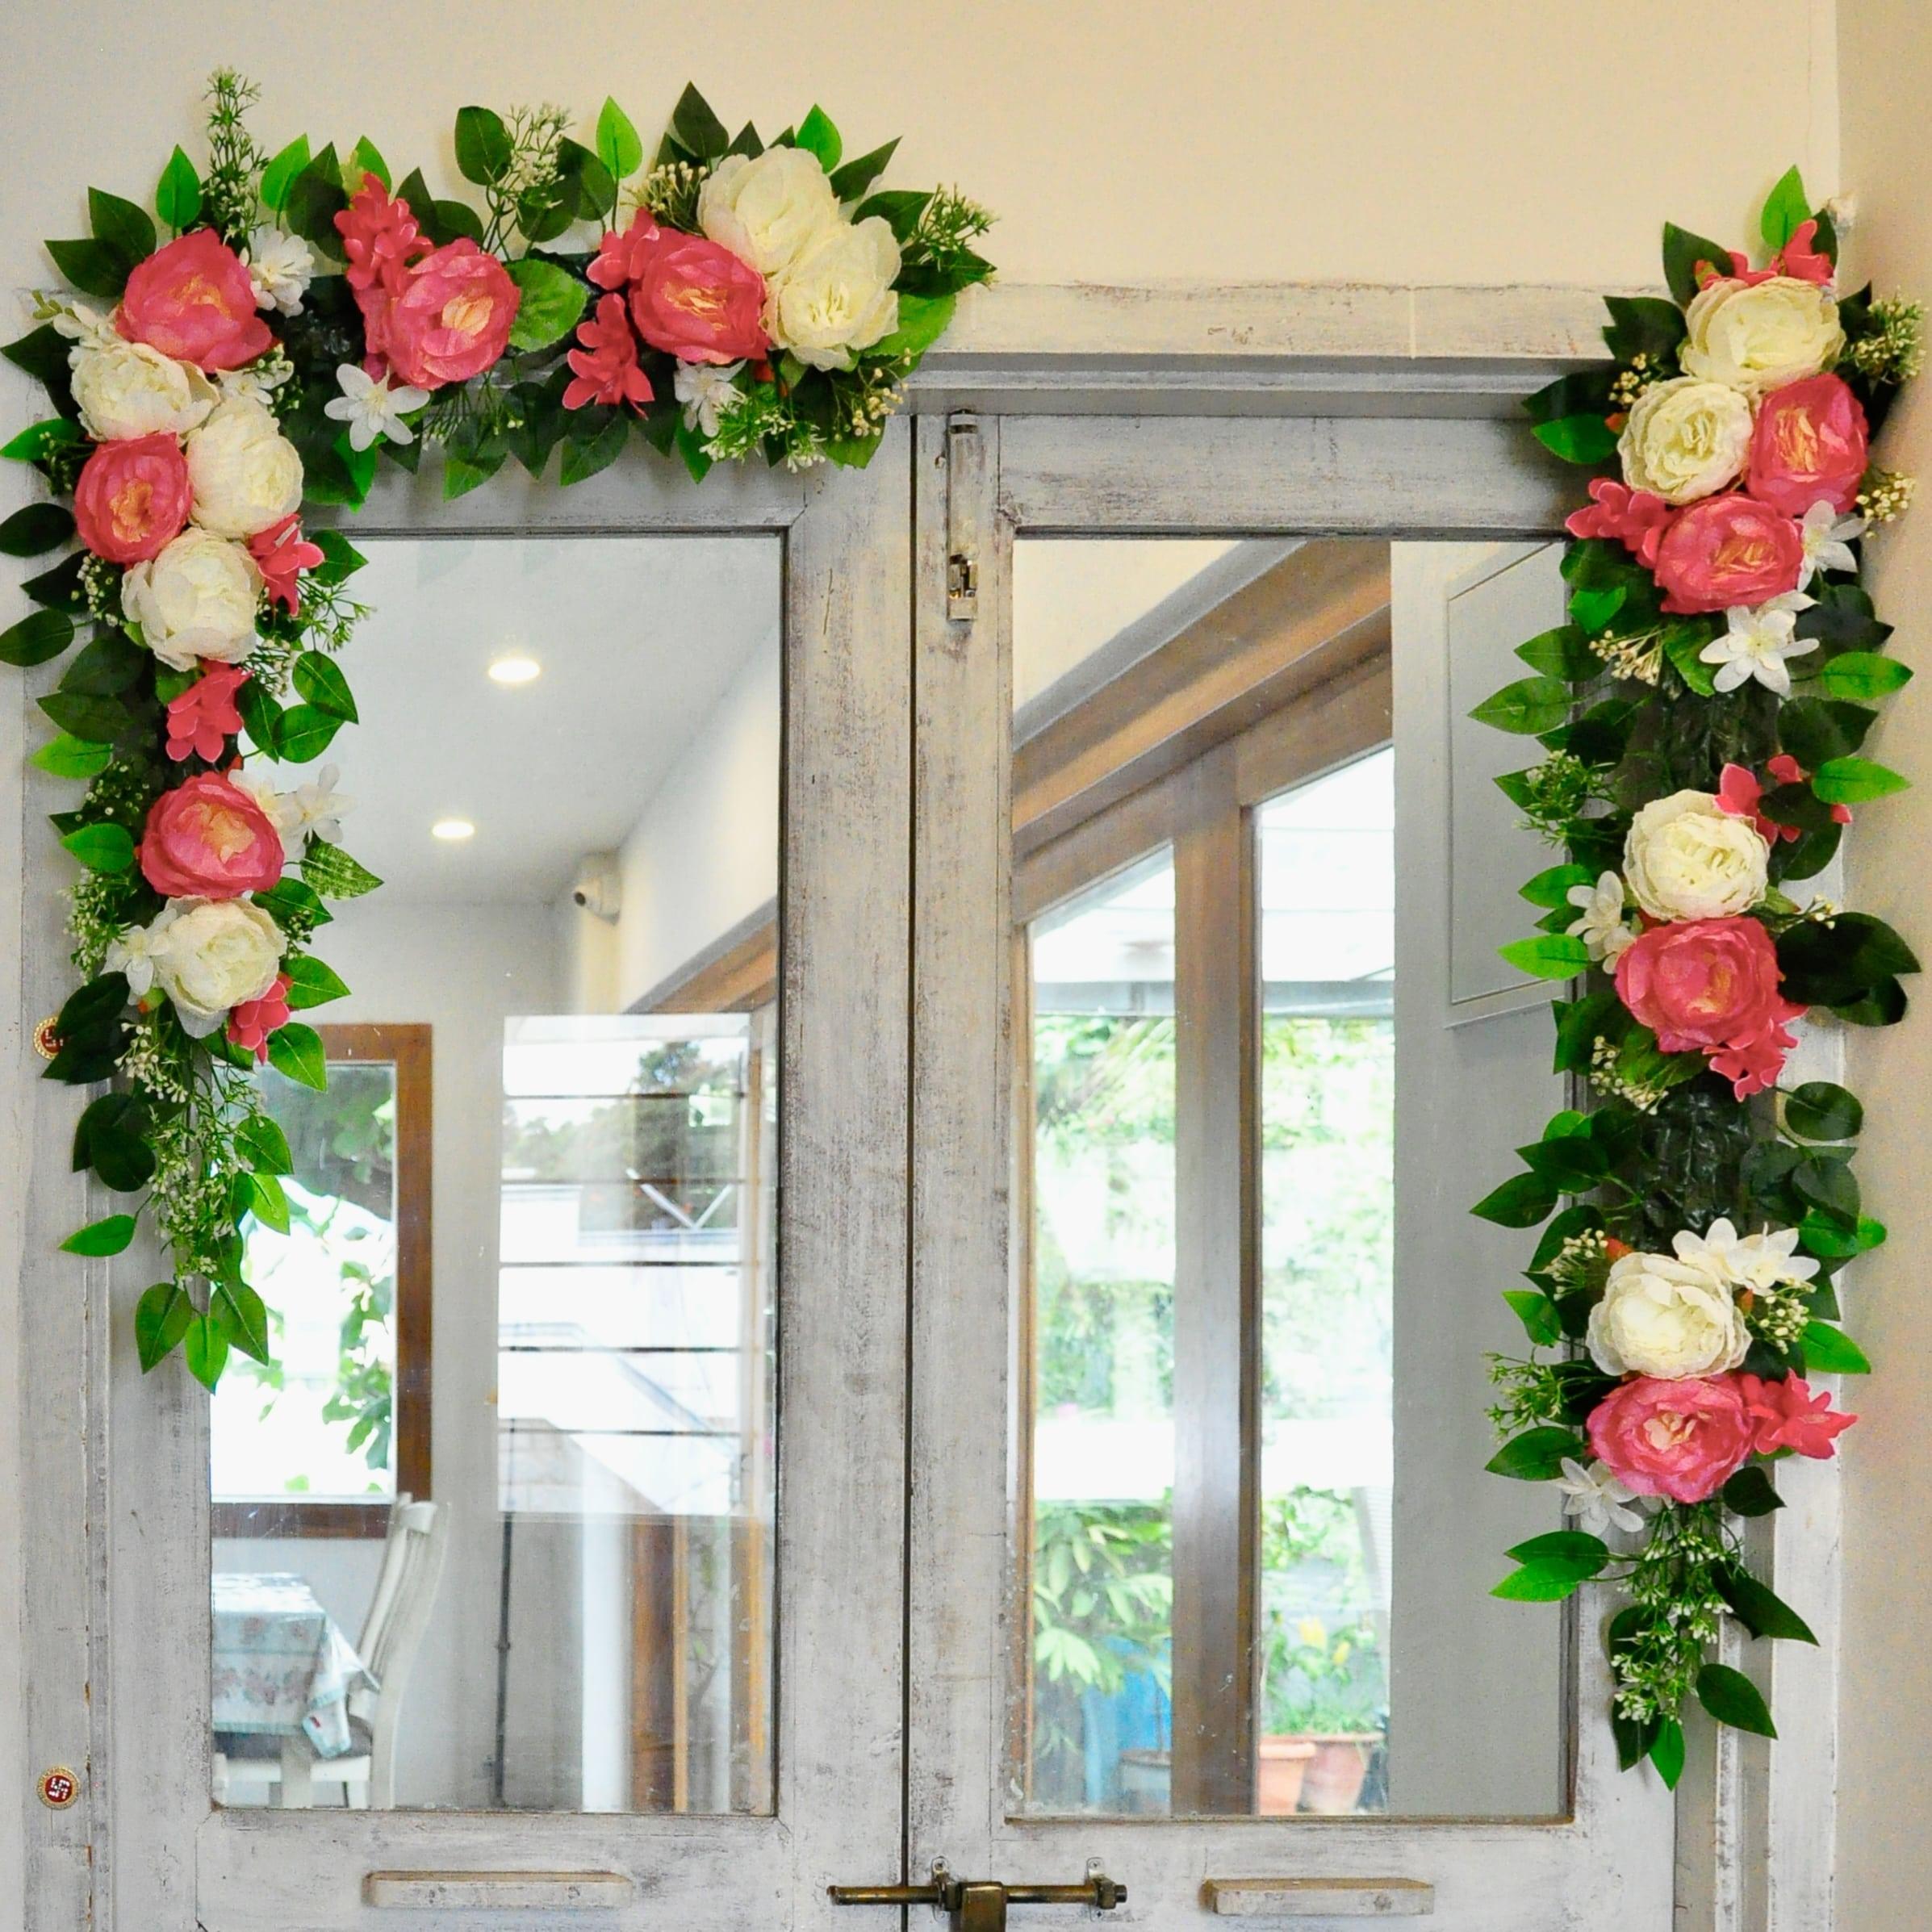 Olive Door Toran - Floral Art by Nandini (A unit of R S creations and designs)